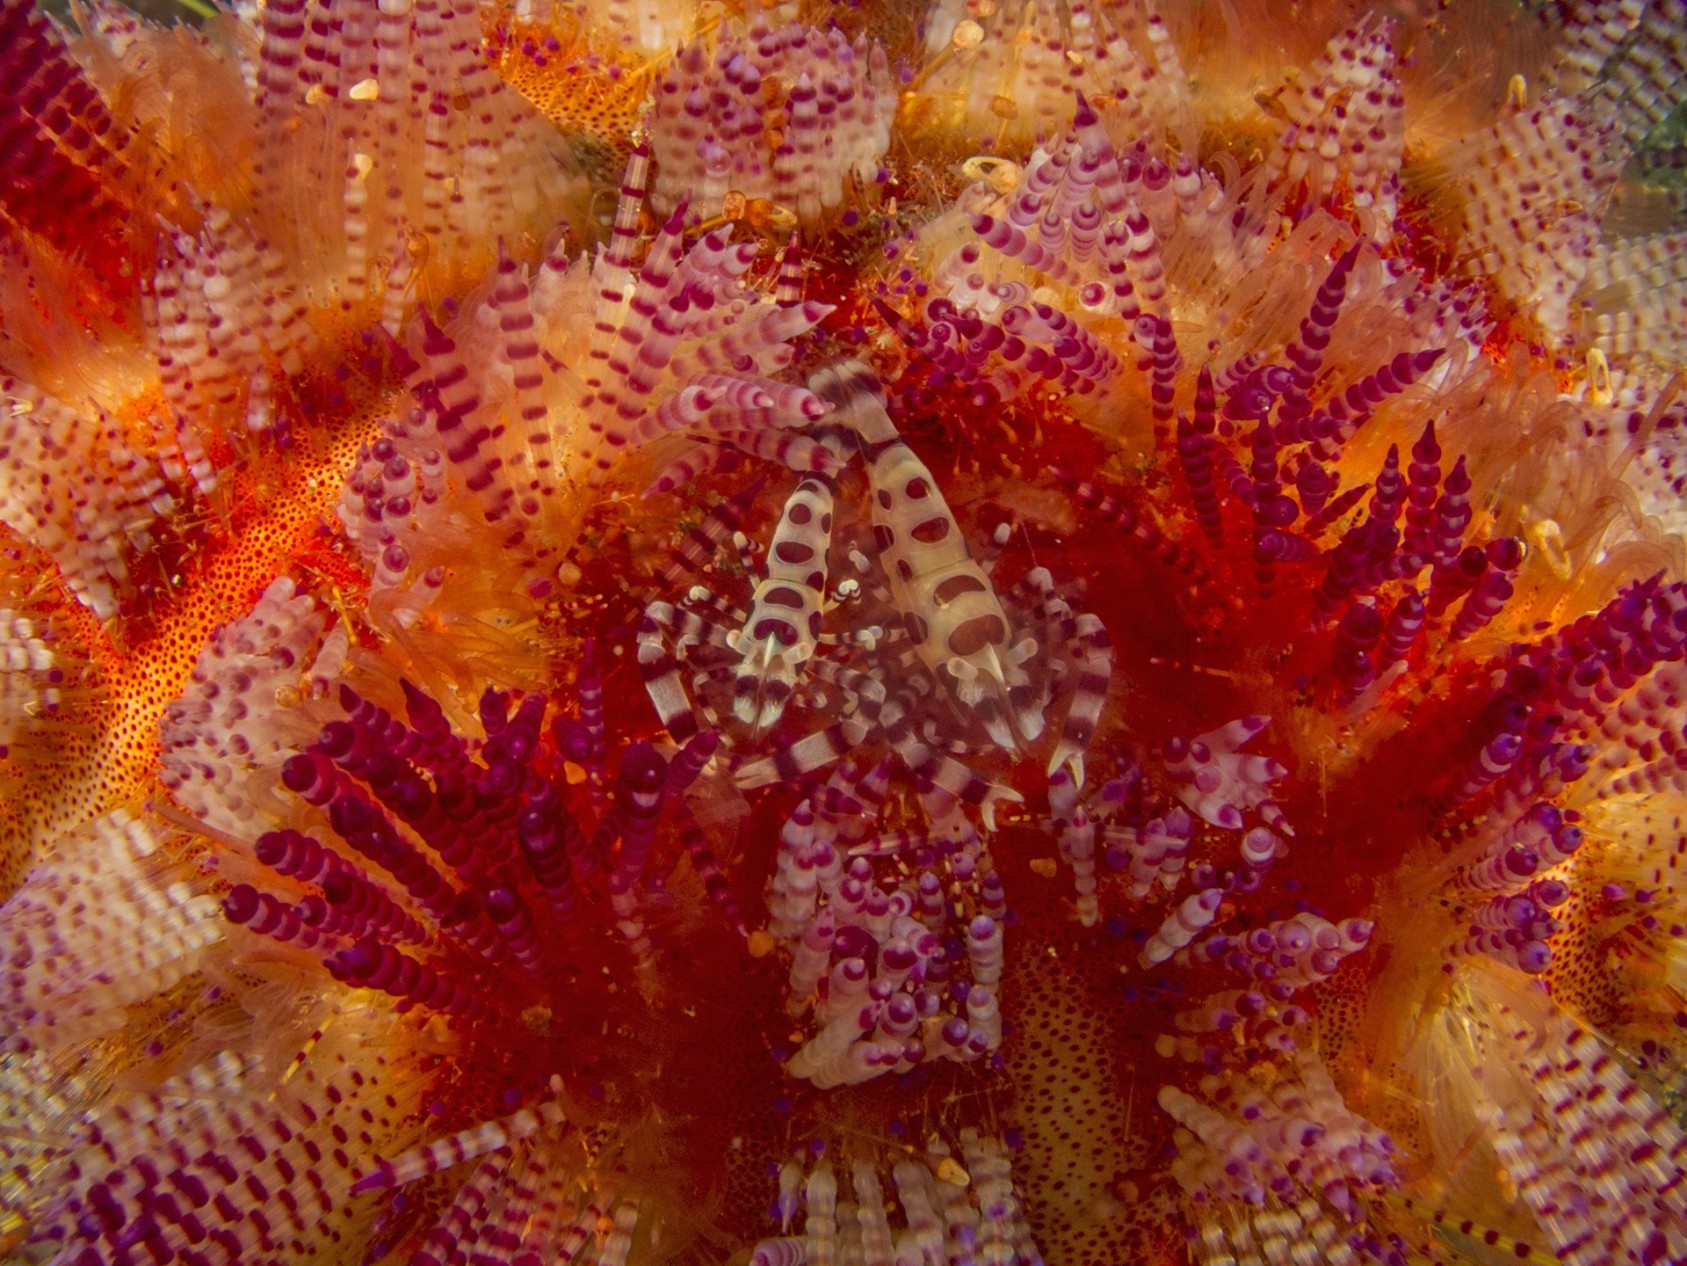 This pair of vibrantly coloured Coleman Shrimp were hiding among the brightly patterned Fire Urchin. Shrimp and Fire Urchin share a kind of symbiotic relationship known as commensalism – the Coleman Shrimp seeks refuge among the spines of the urchin host, which, although it doesn’t derive any benefit from carrying the shrimp, is not harmed by it either.